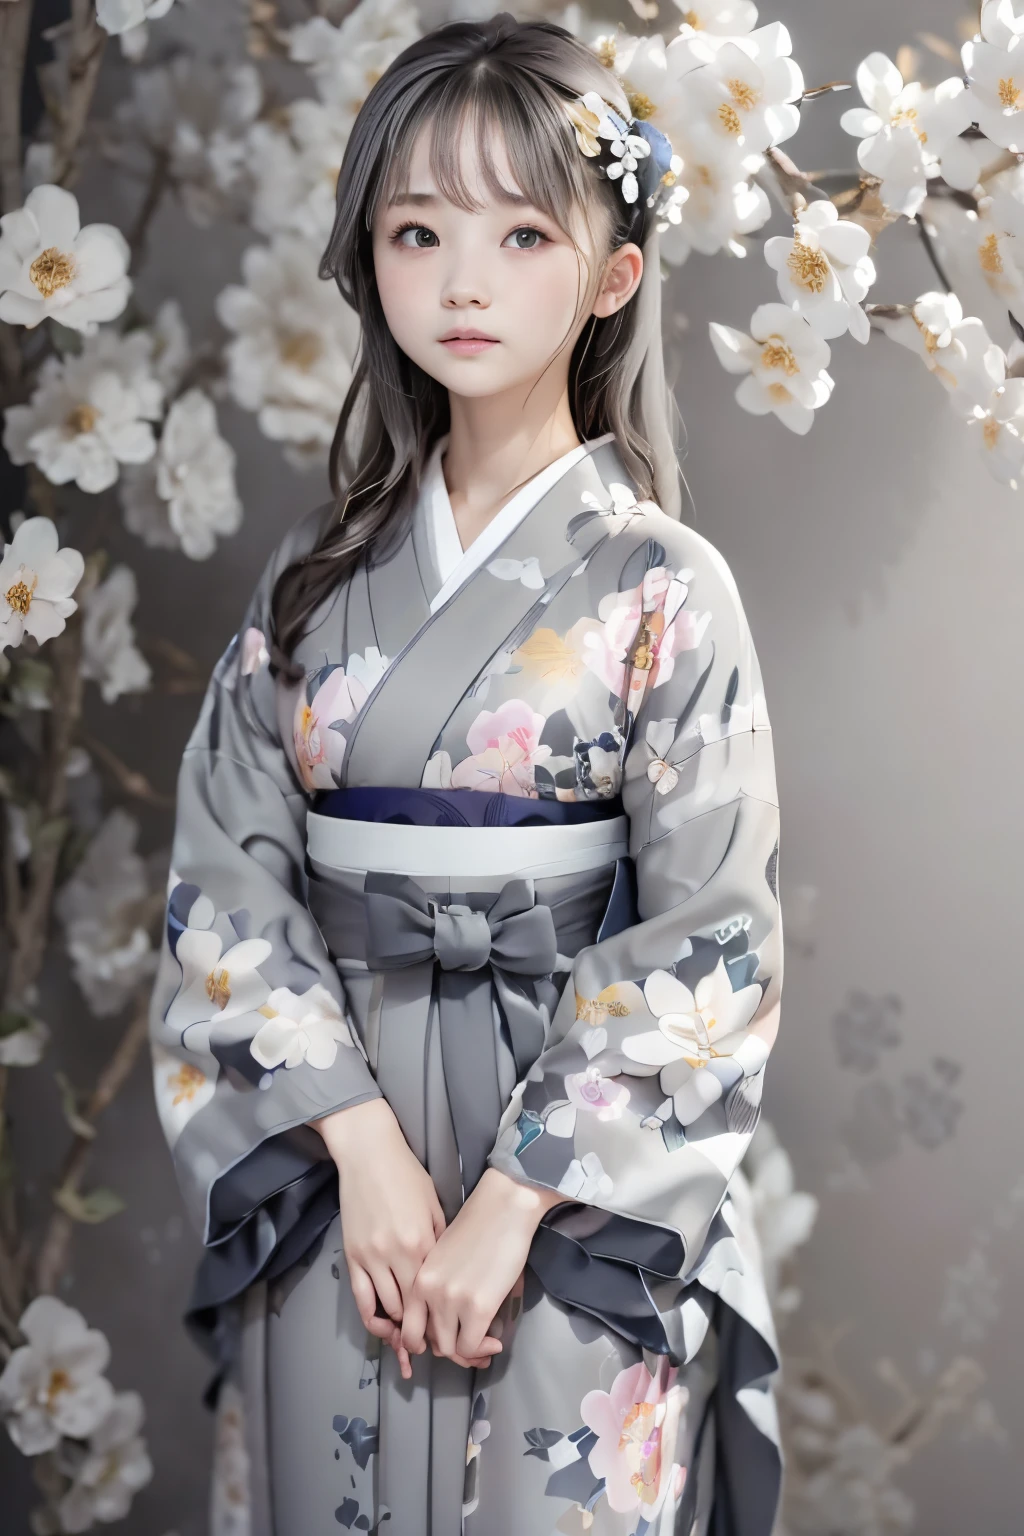 (((gray floral background:1.3)))、Best Quality, masutepiece, High resolution, (((1girl in))), sixteen years old,(((Eyes are gray:1.3)))、Gray kimono、((beautiful gray kimono)), Tindall Effect, Realistic, Shadow Studio,Ultramarine Lighting, dual-tone lighting, (High Detail Skins: 1.2)、Pale colored lighting、Dark lighting、 Digital SLR, Photo, High resolution, 4K, 8K, Background blur,Fade out beautifully、gray flower world